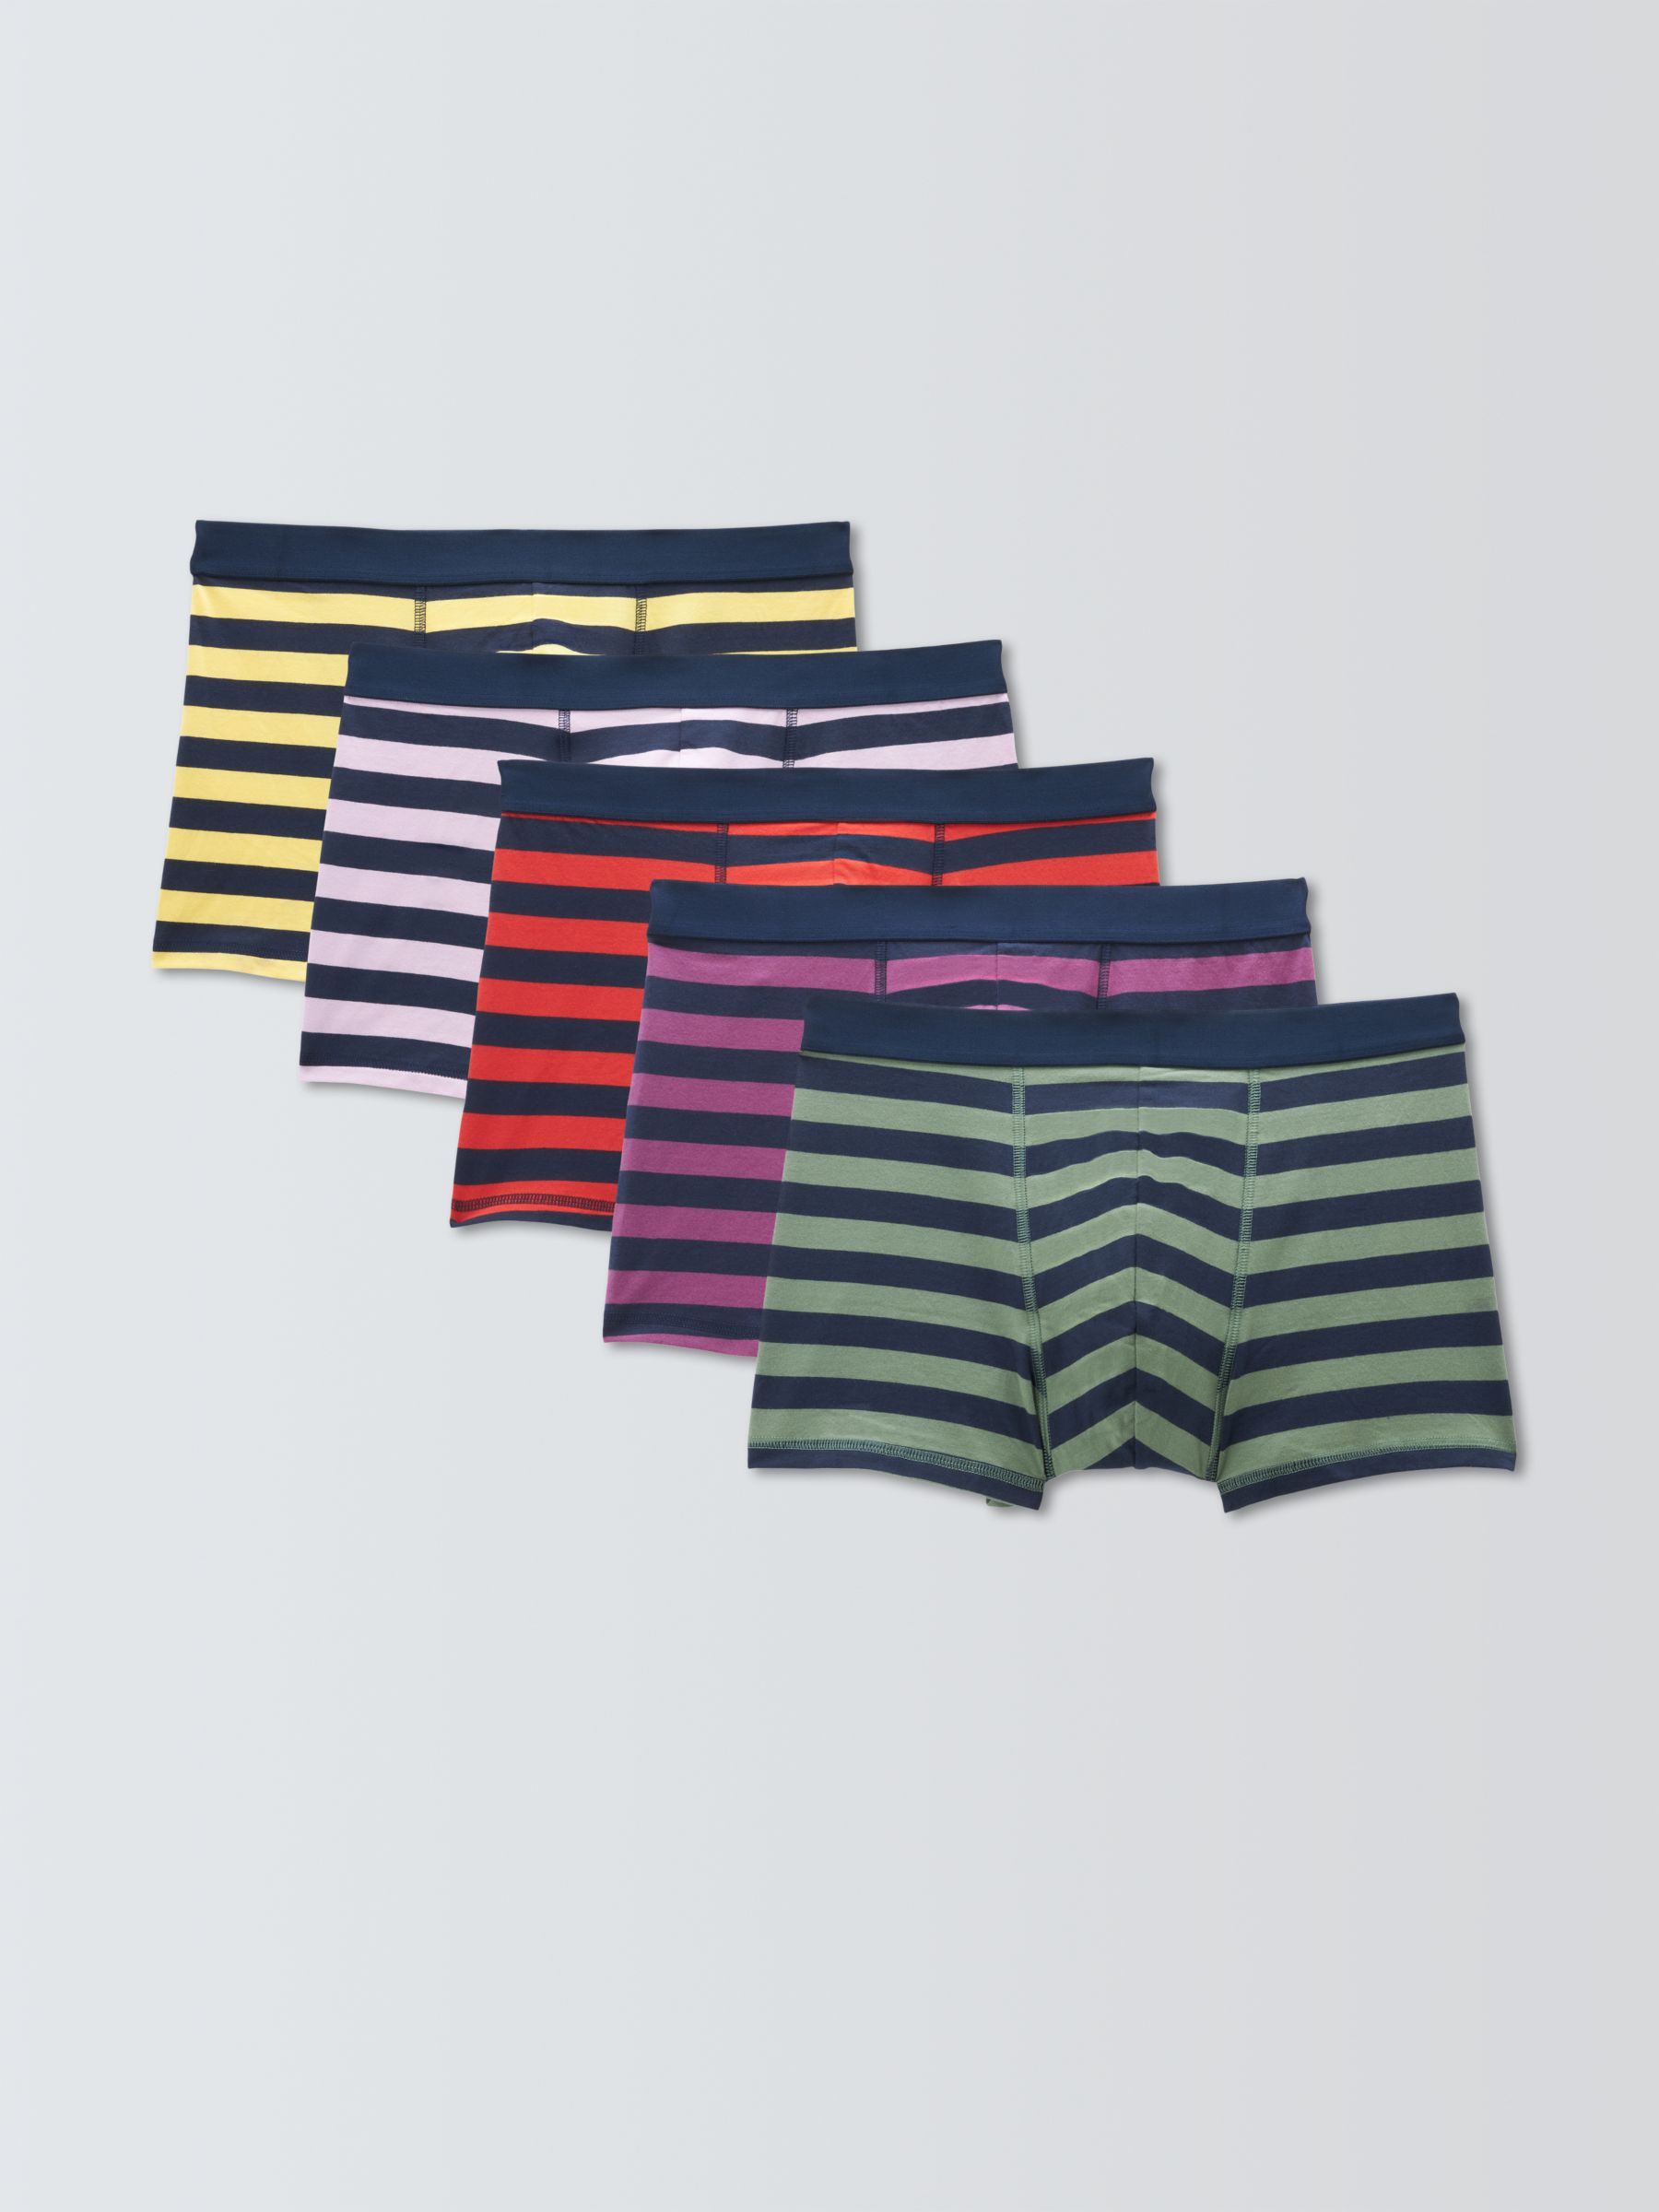 John Lewis ANYDAY Cotton Trunks, Pack of 5, Rugby Stripe, XL